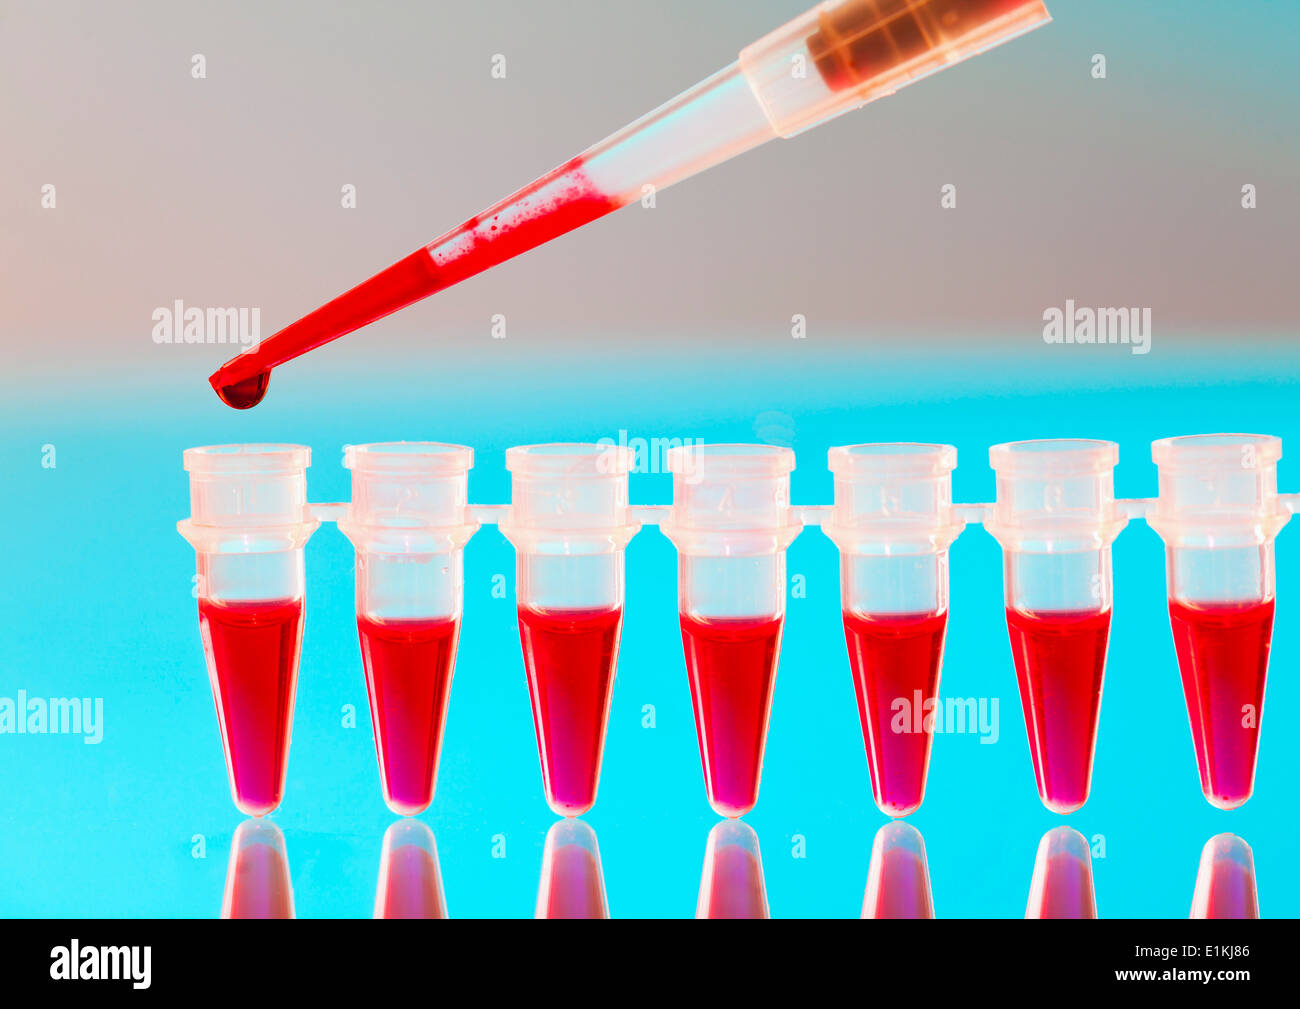 Pipette and microtubes used for blood testing. Stock Photo